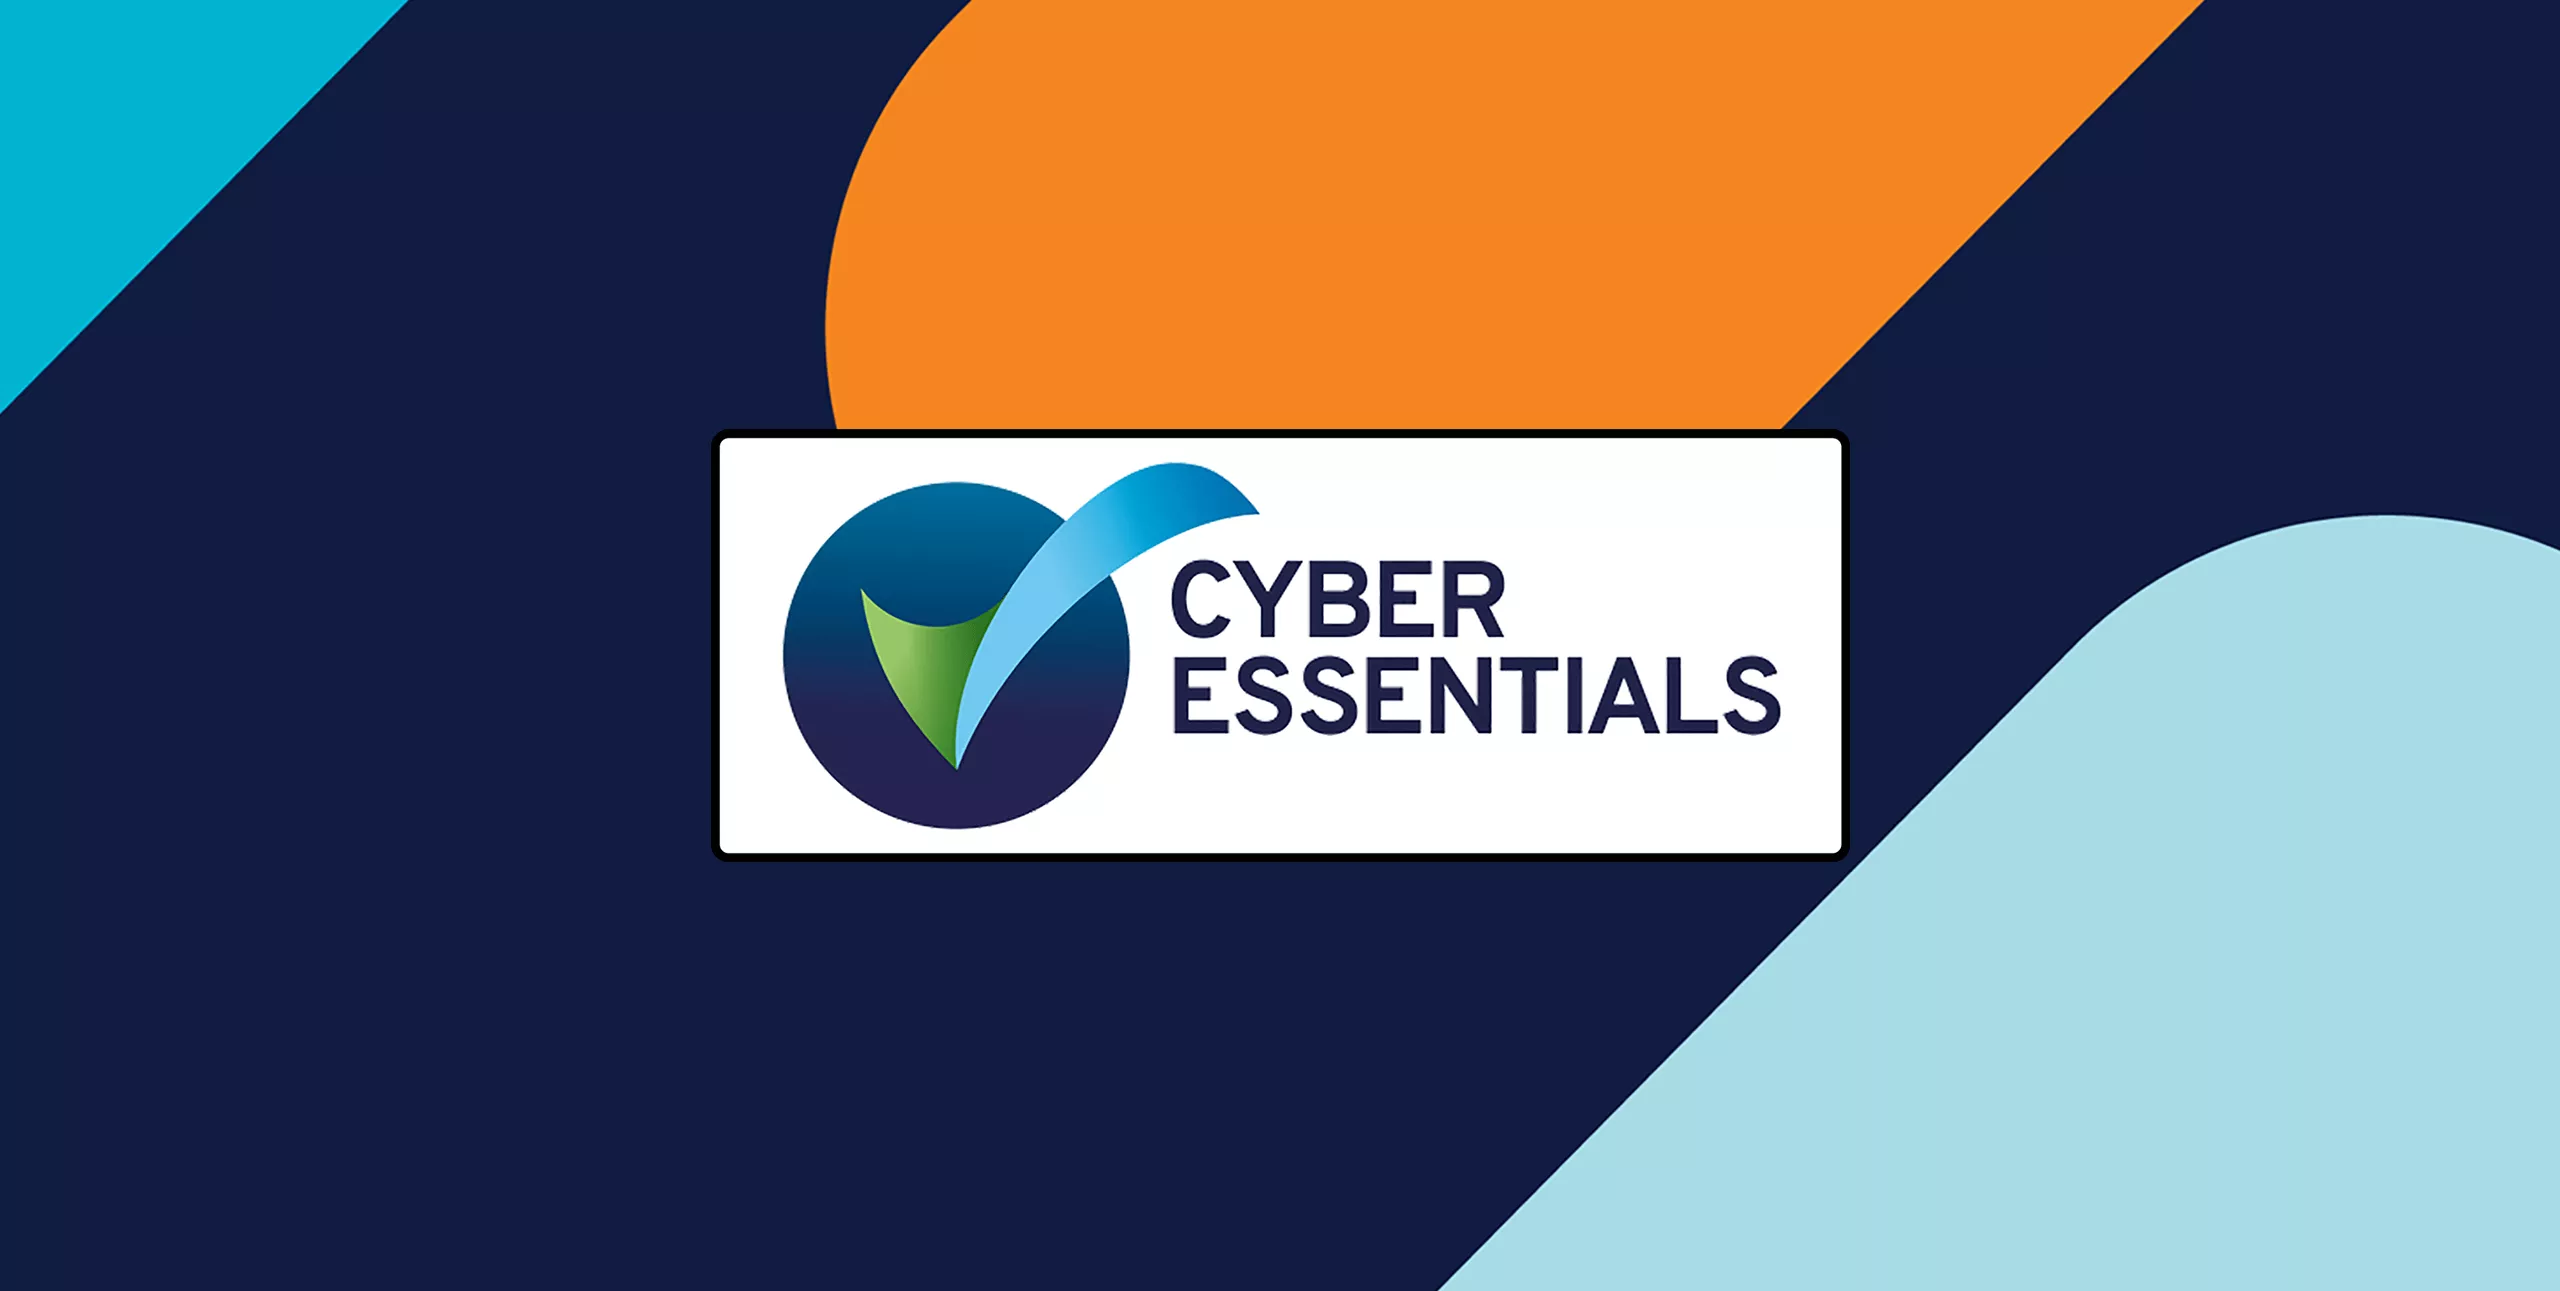 Cyber Essentials certification with Cyber Security Services